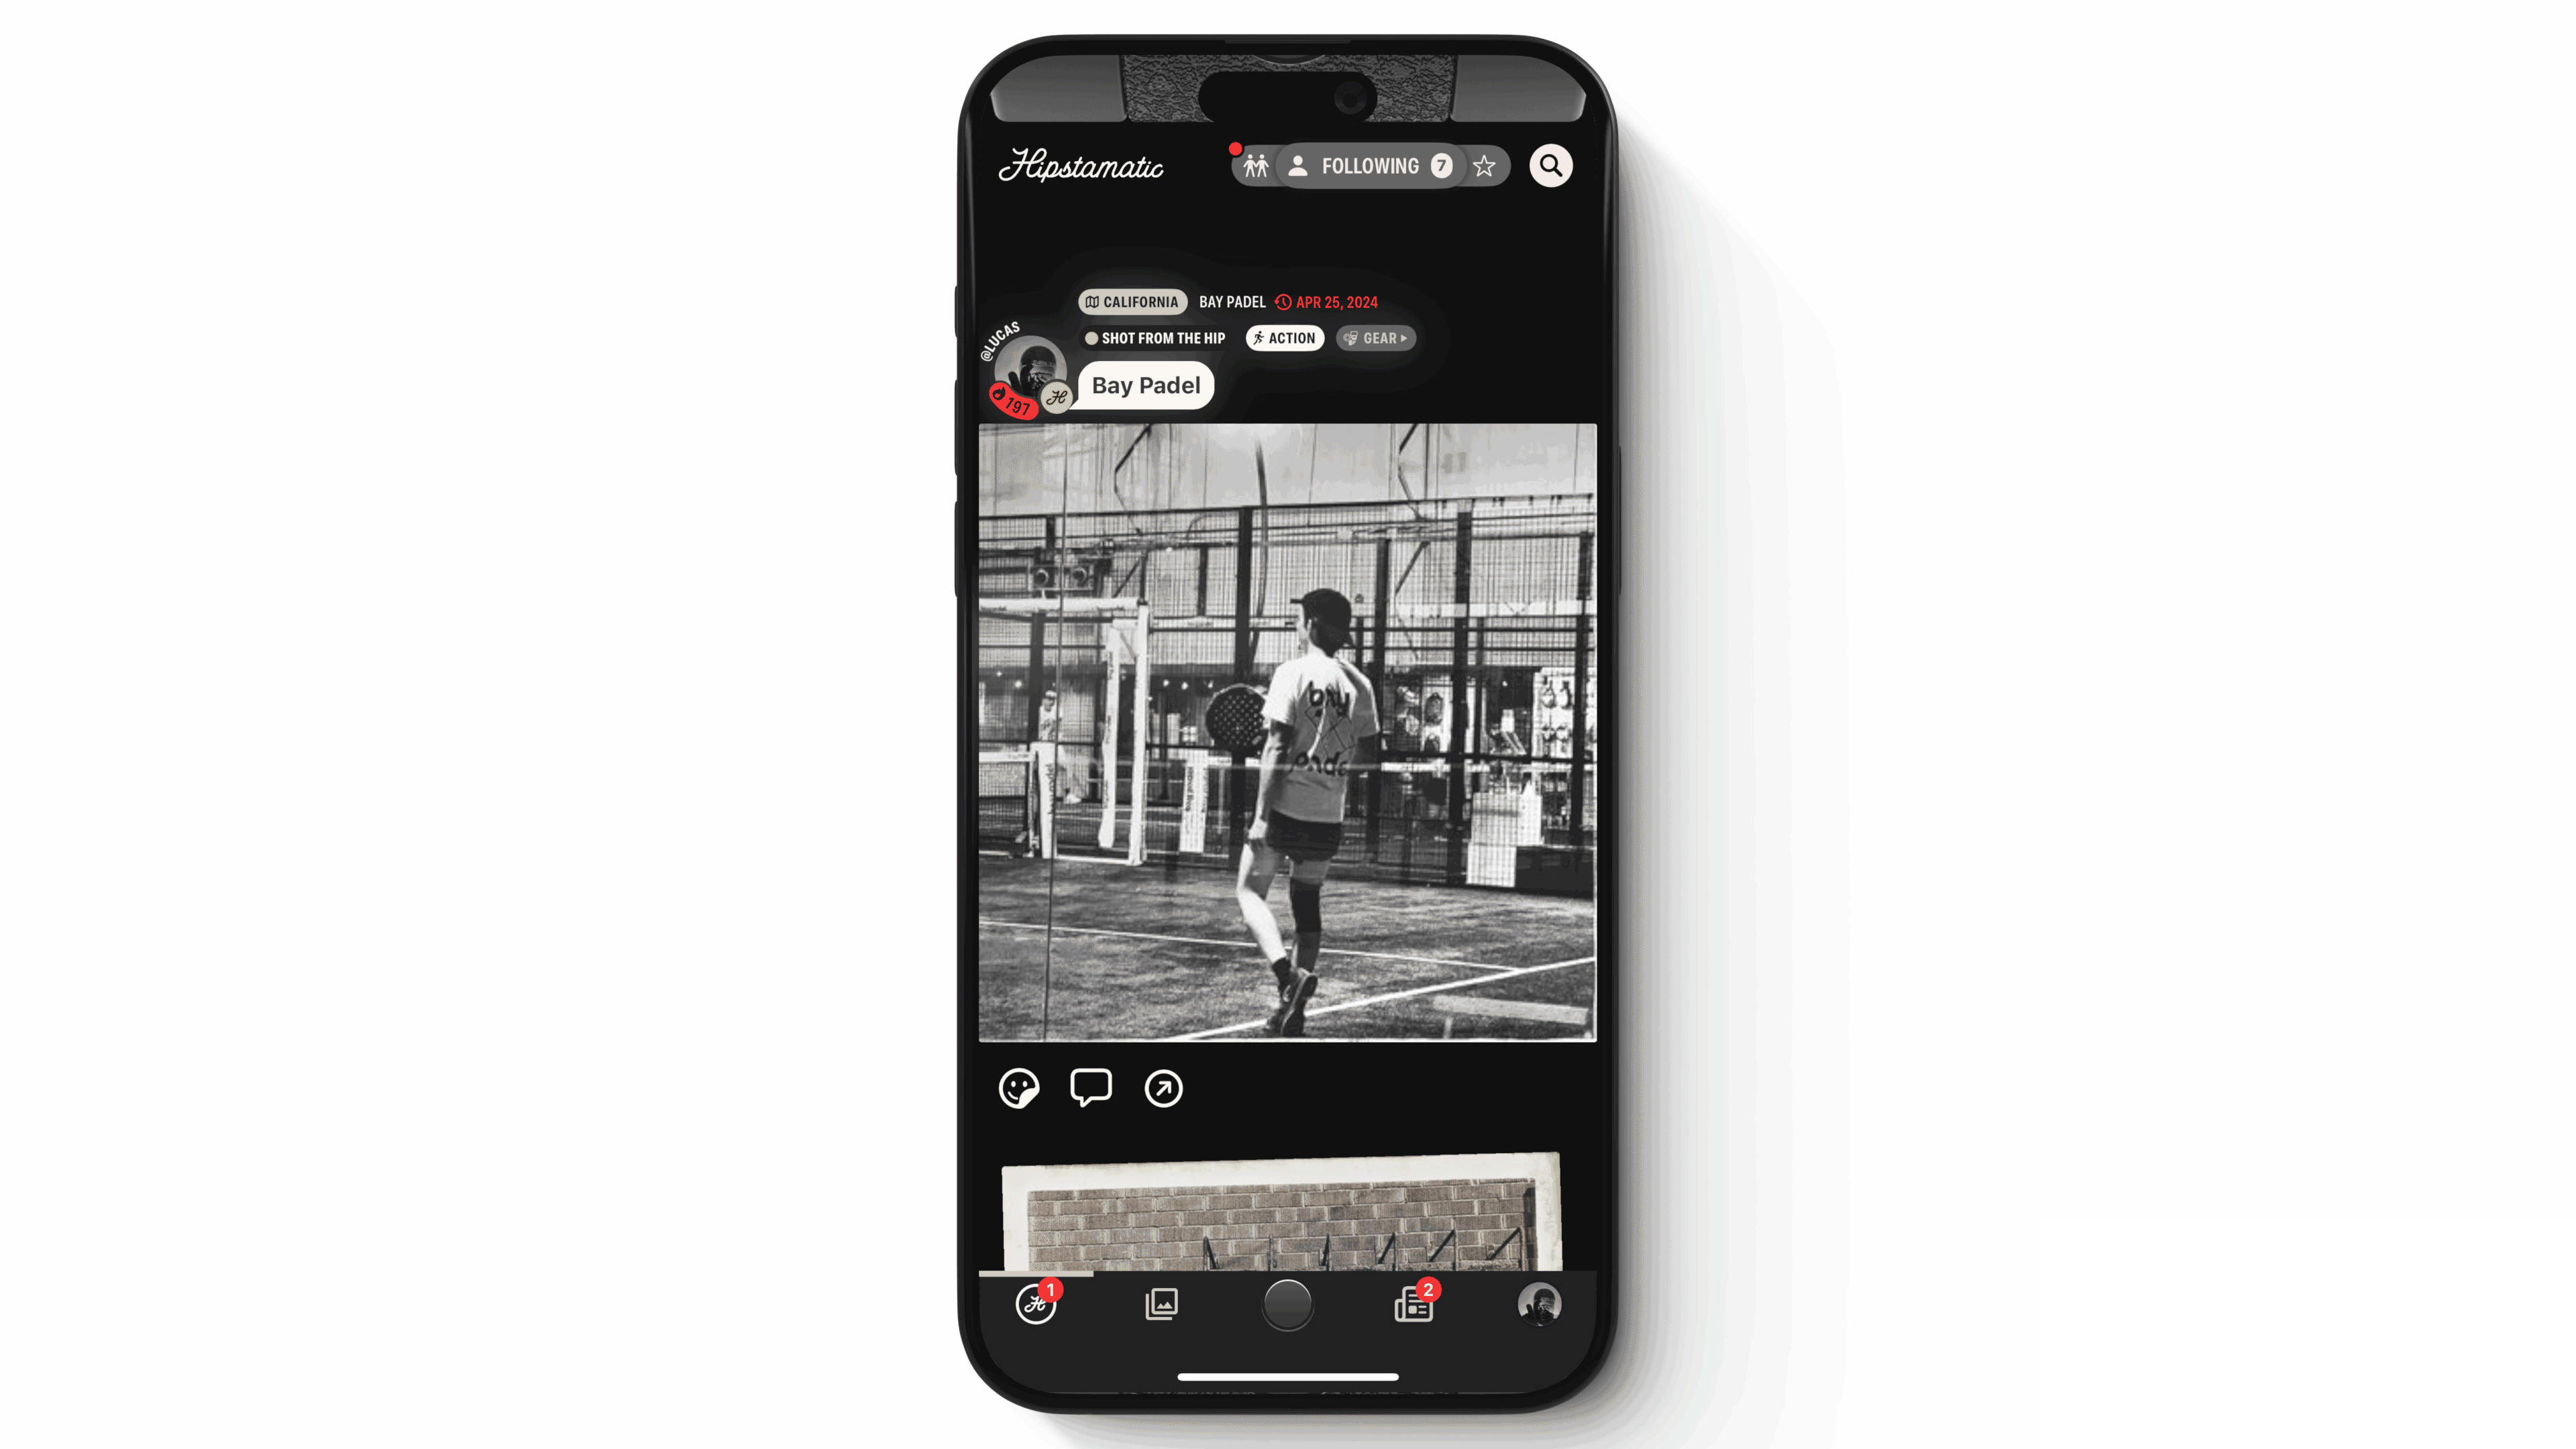 A smartphone displaying a social media app interface with a black and white photo of a man playing basketball in a gym, visible onscreen. icons for likes, comments, and shares are at the bottom.